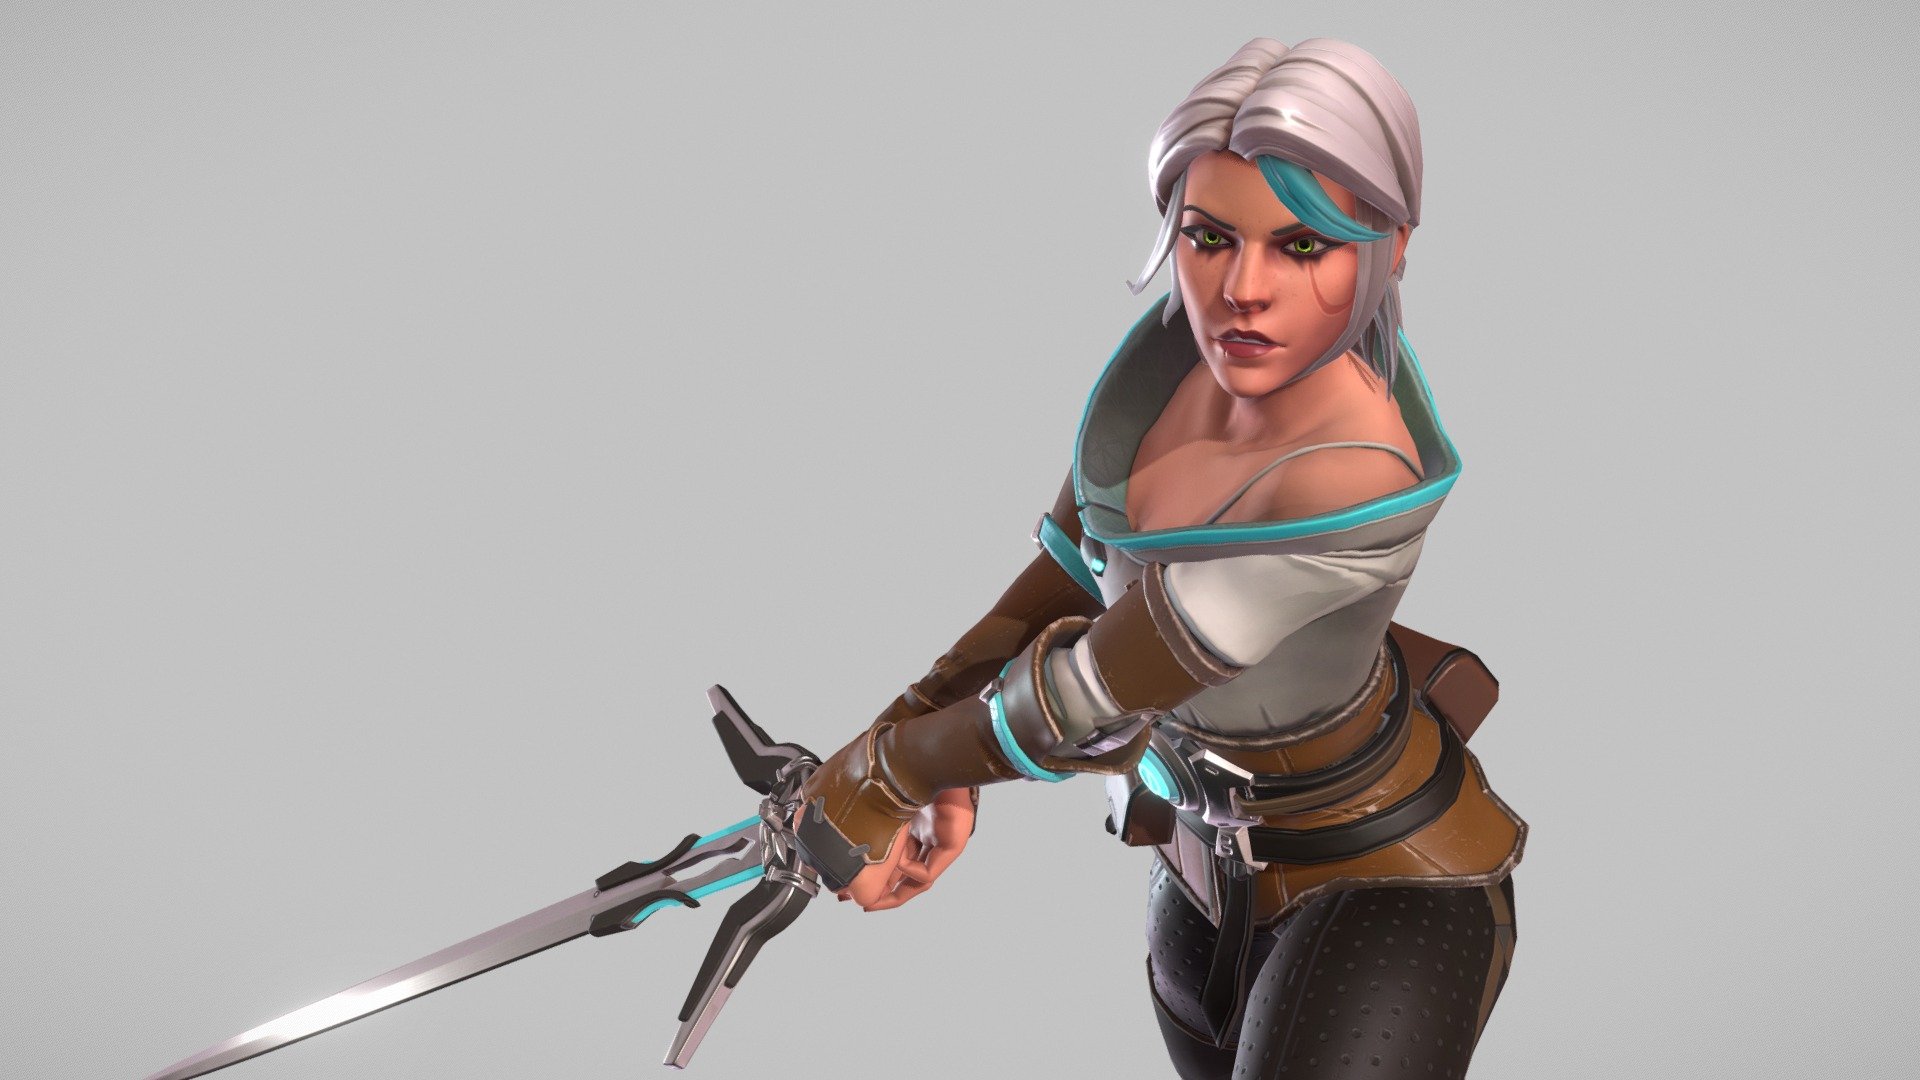 Fanart model of Ciri (The Witcher) done in the art style of the Overwatch universe!
Static images and some more info: https://www.artstation.com/artwork/N6mwD - Ciri - Witcher // Overwatch Mashup - 3D model by Agelos Apostolopoulos (@arkoudi) 3d model